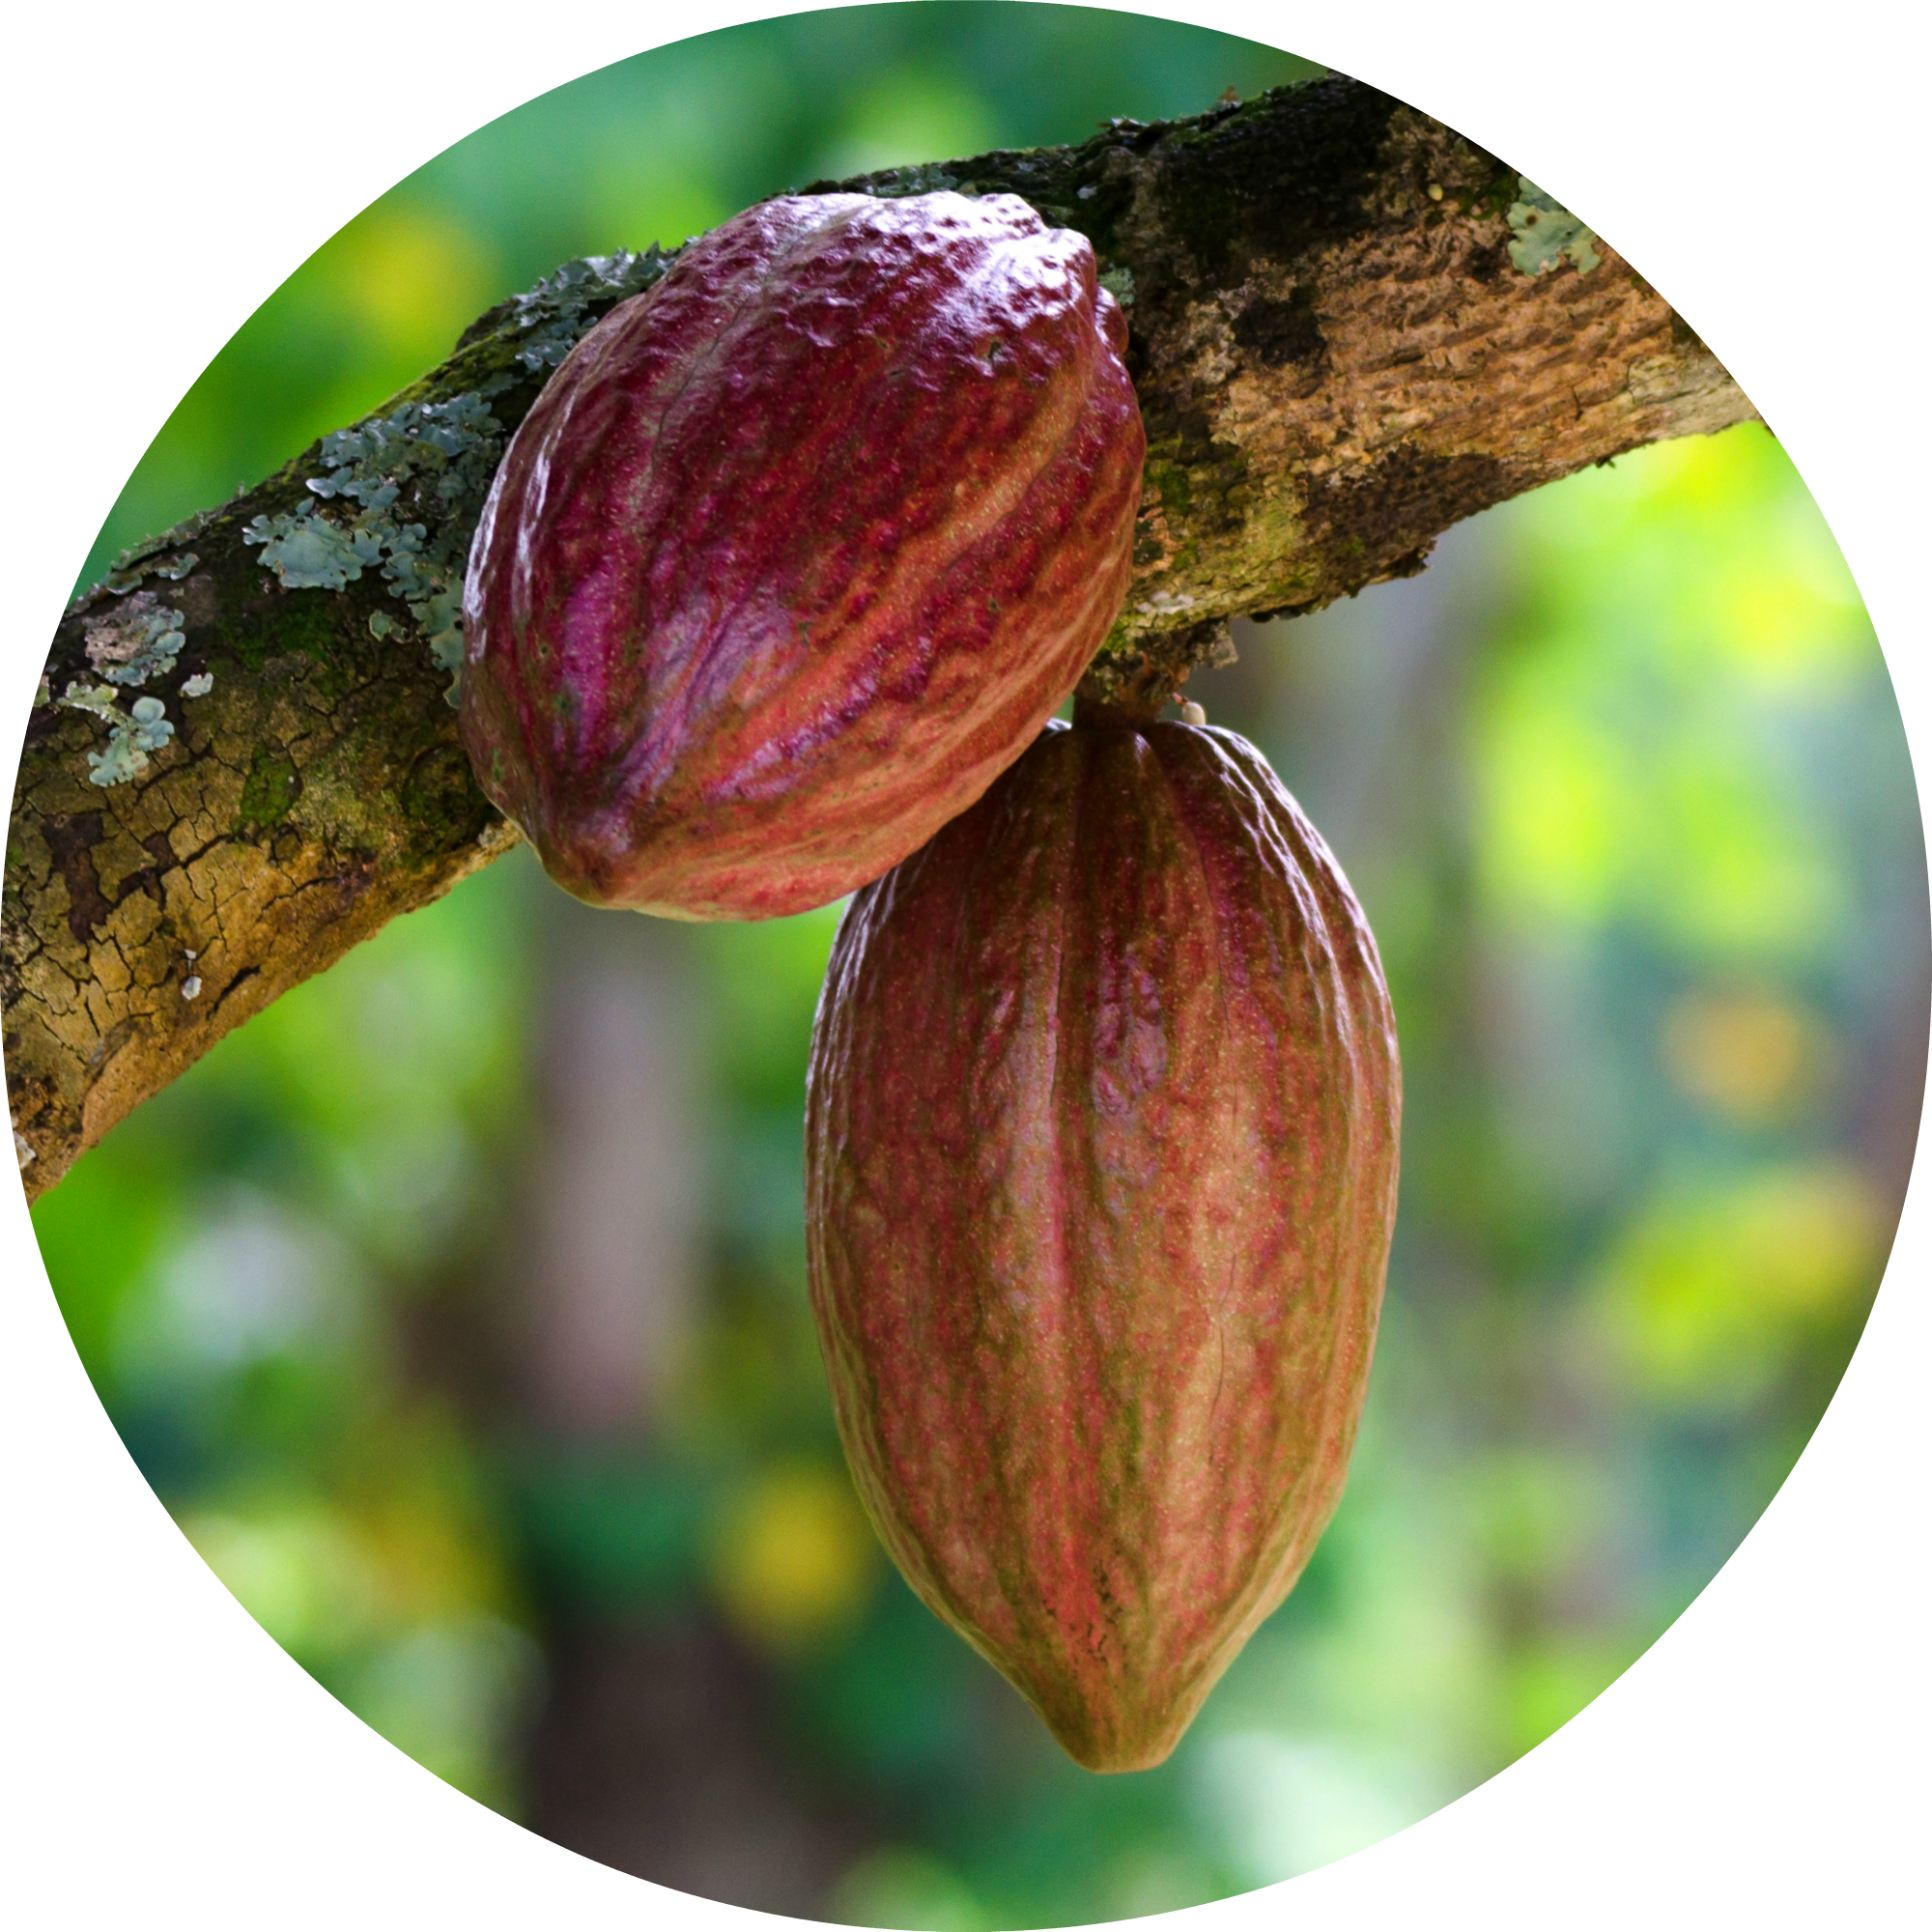 Cacao PNG Image